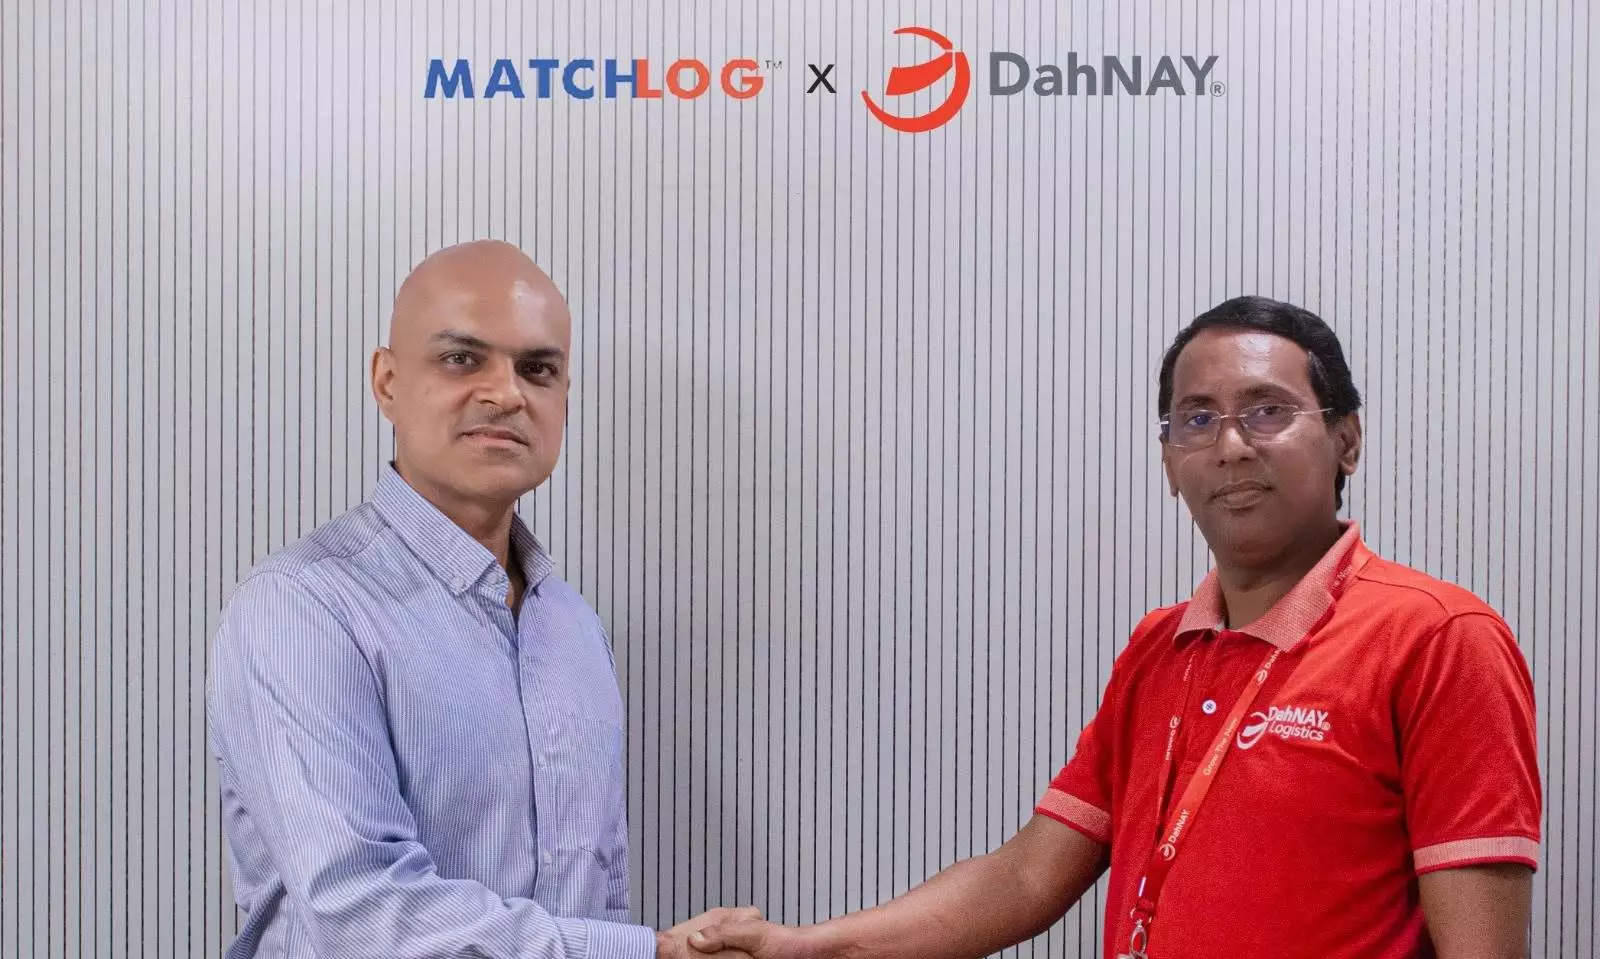 MatchLog collaborates with DahNAY for sustainable logistics